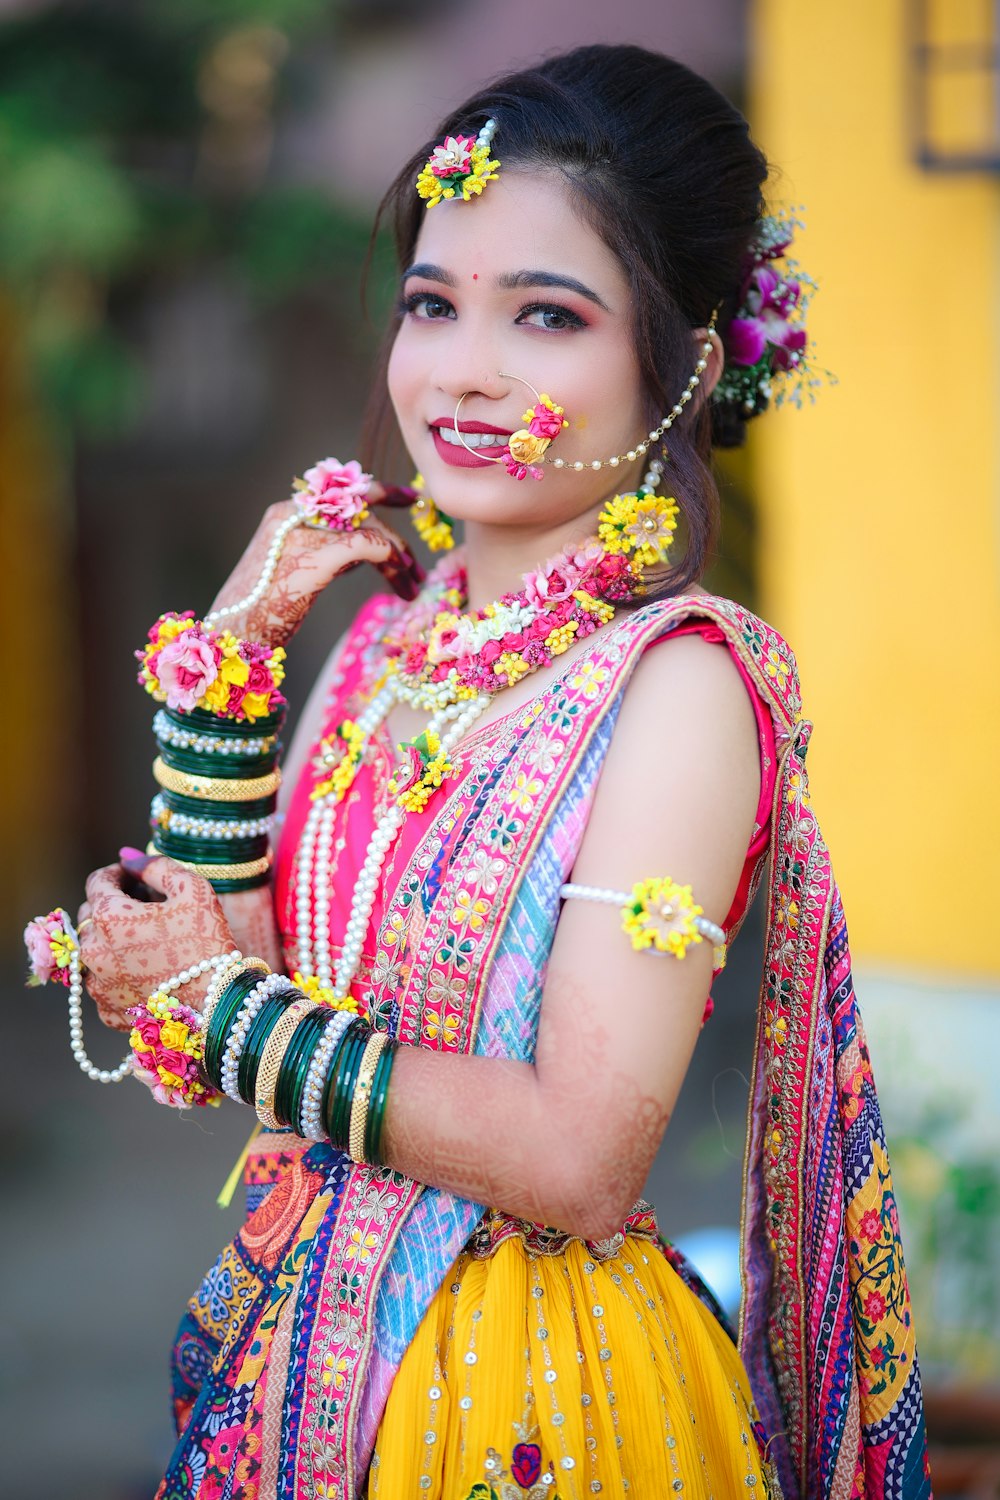 a woman dressed in a colorful outfit and jewelry